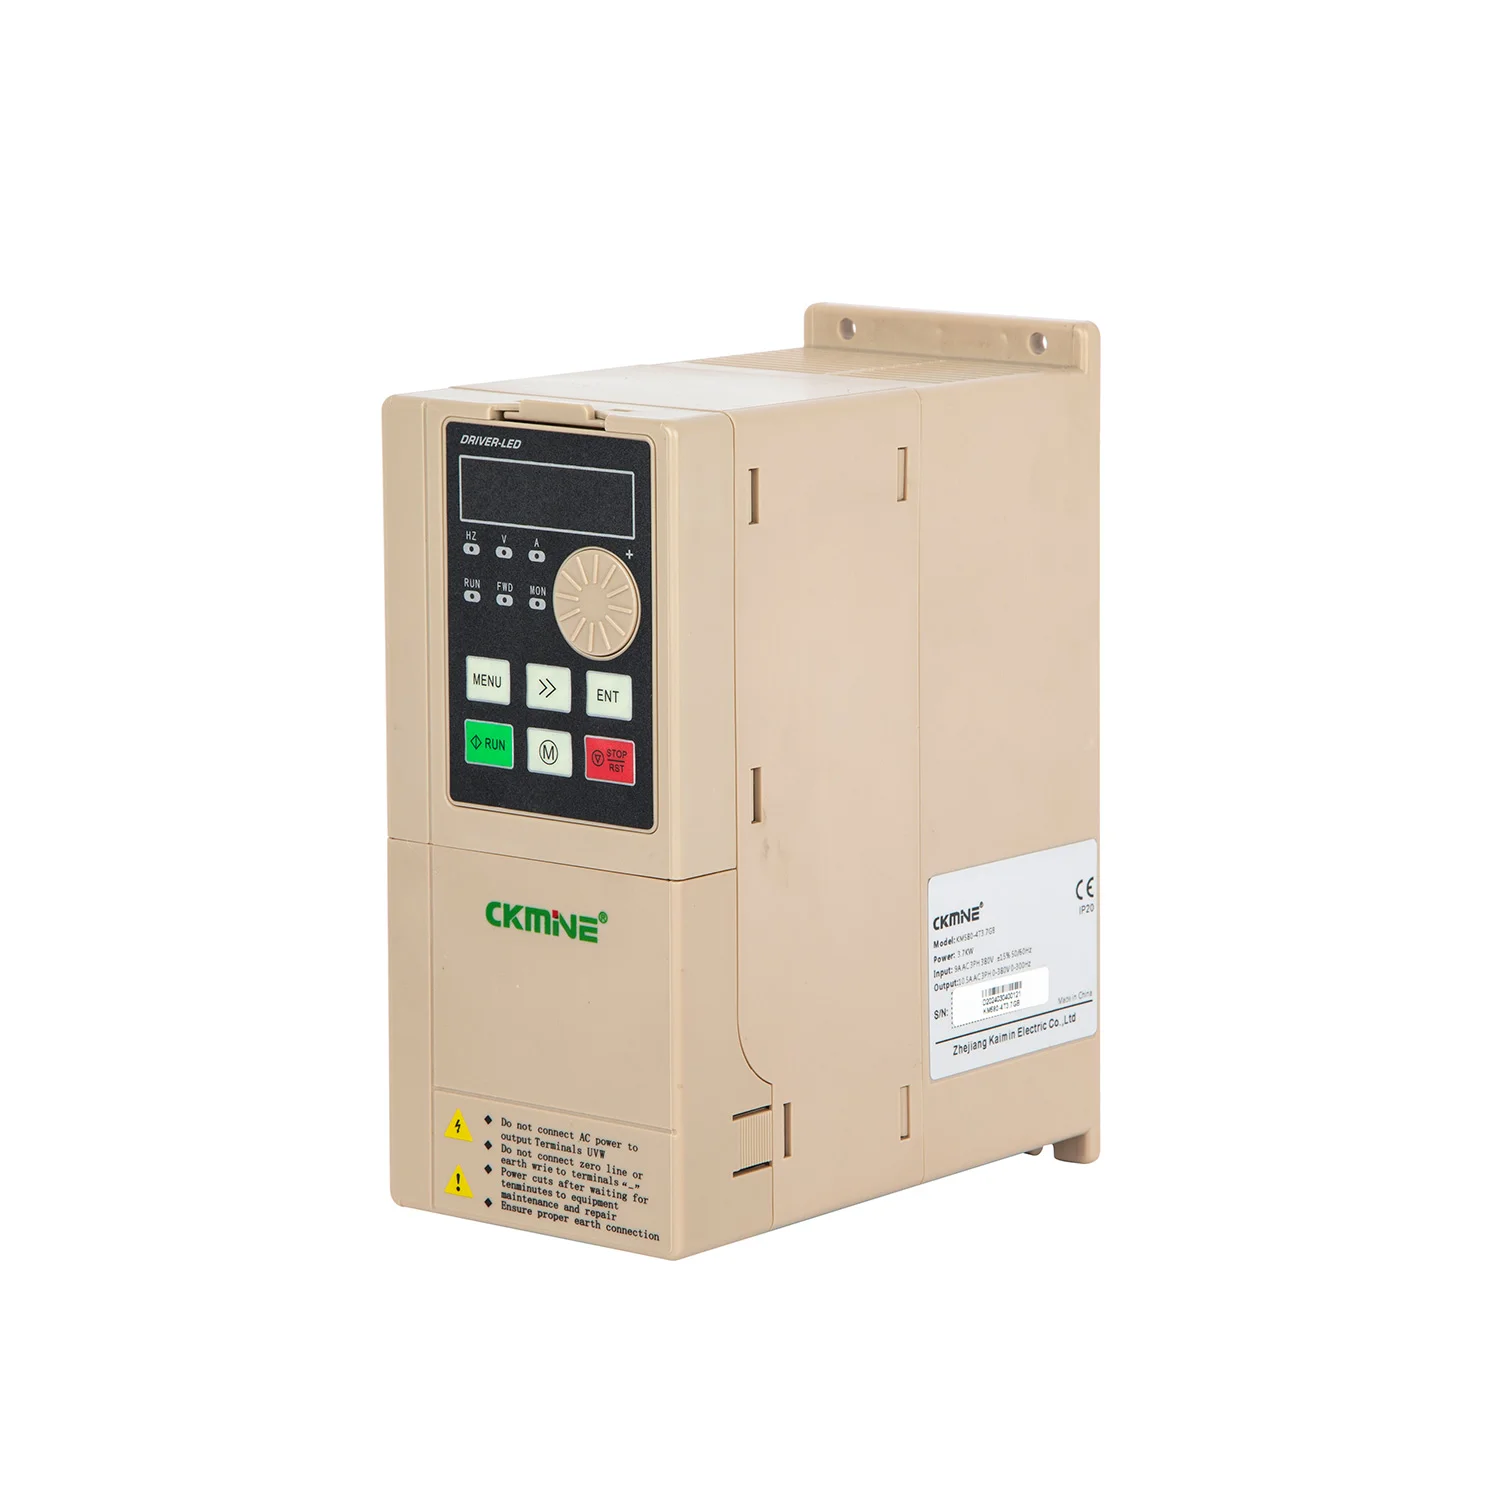 CKMINE Factory Supplier 380v 5.5kw 3.7kw 2.2kw 1.5kw 7.5hp 3 Phase AC Motor Drive Frequency Converter Close Loop VFD Inverter